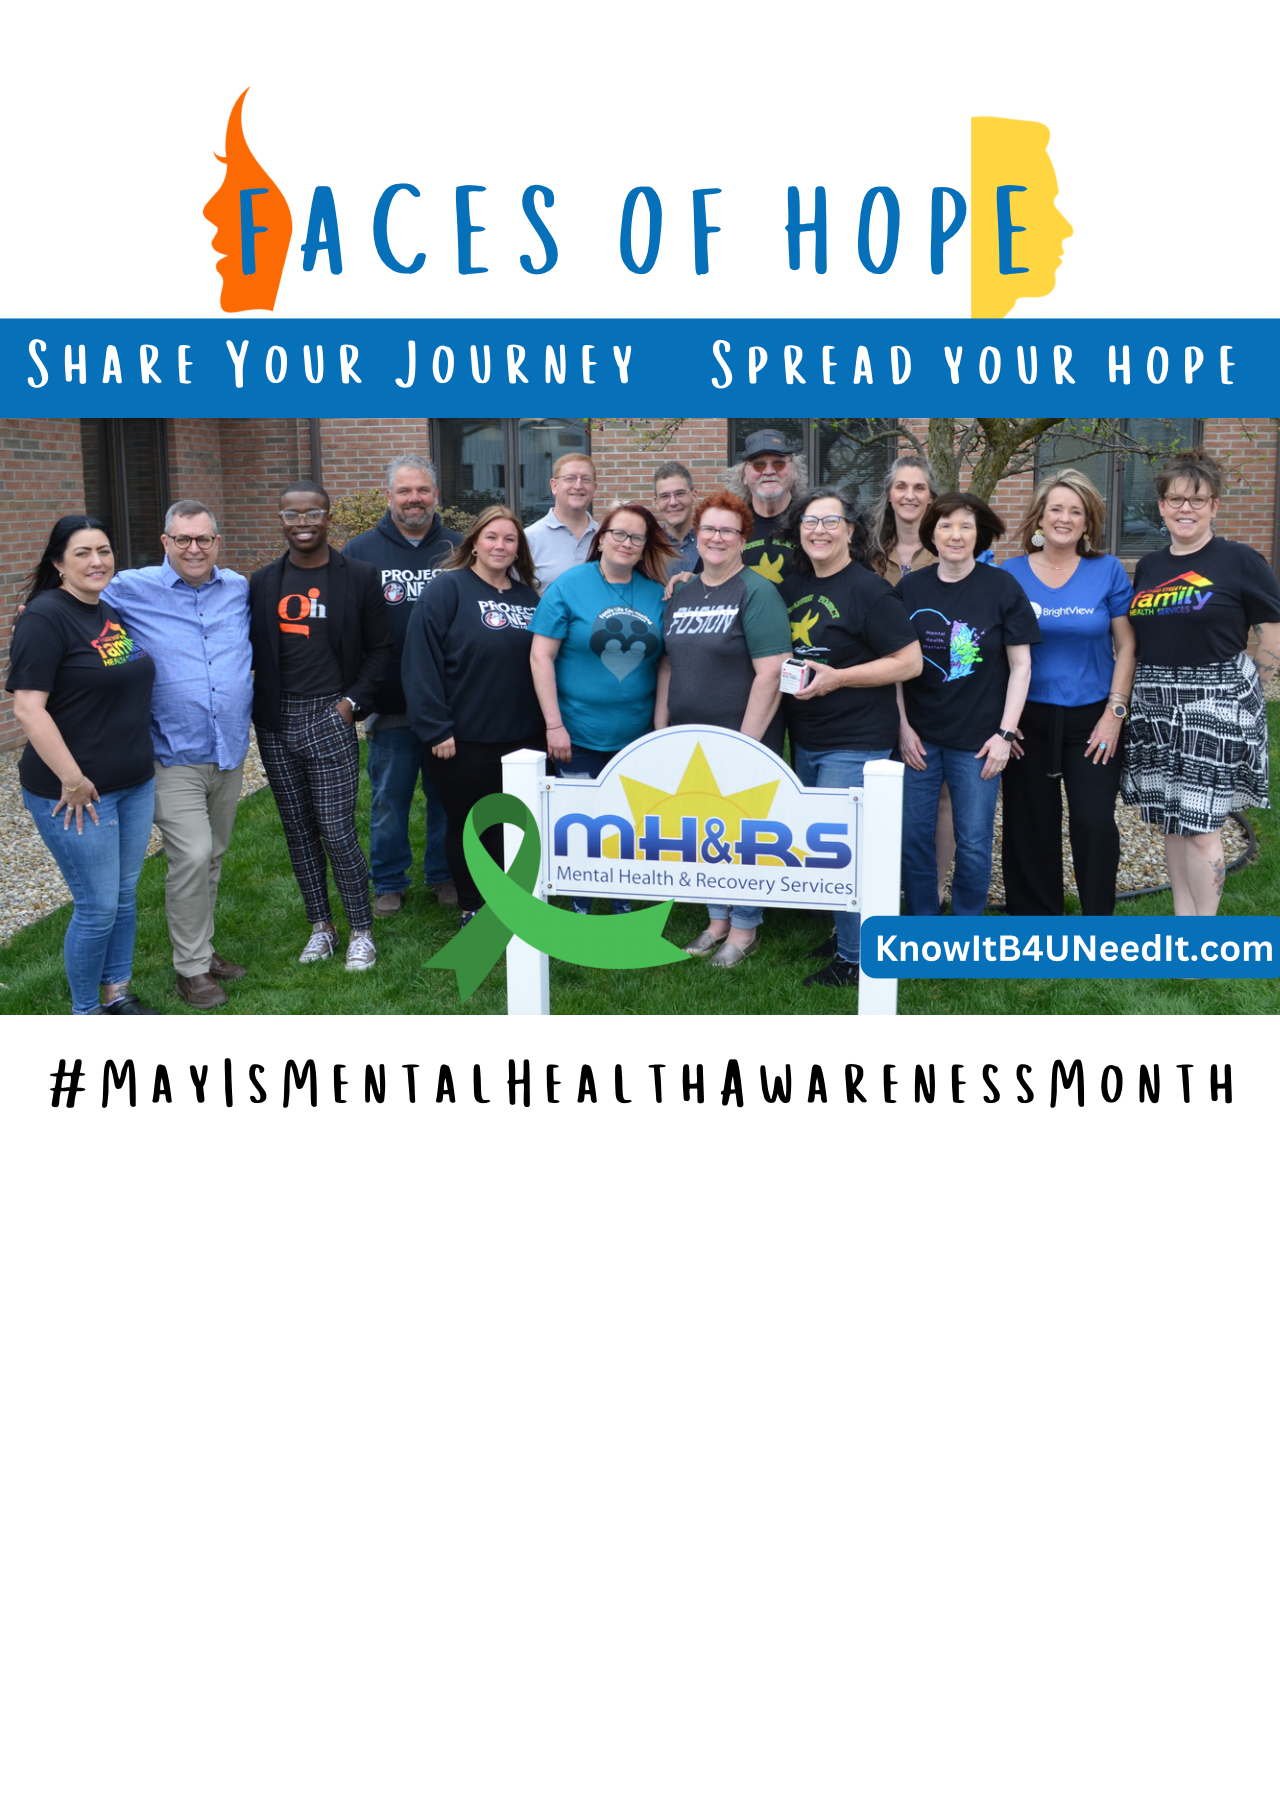 May Is Mehttps://richlandmentalhealth.com/may-is-mental-health-awareness-month/ntal Health Awareness Month Richland County Ohio